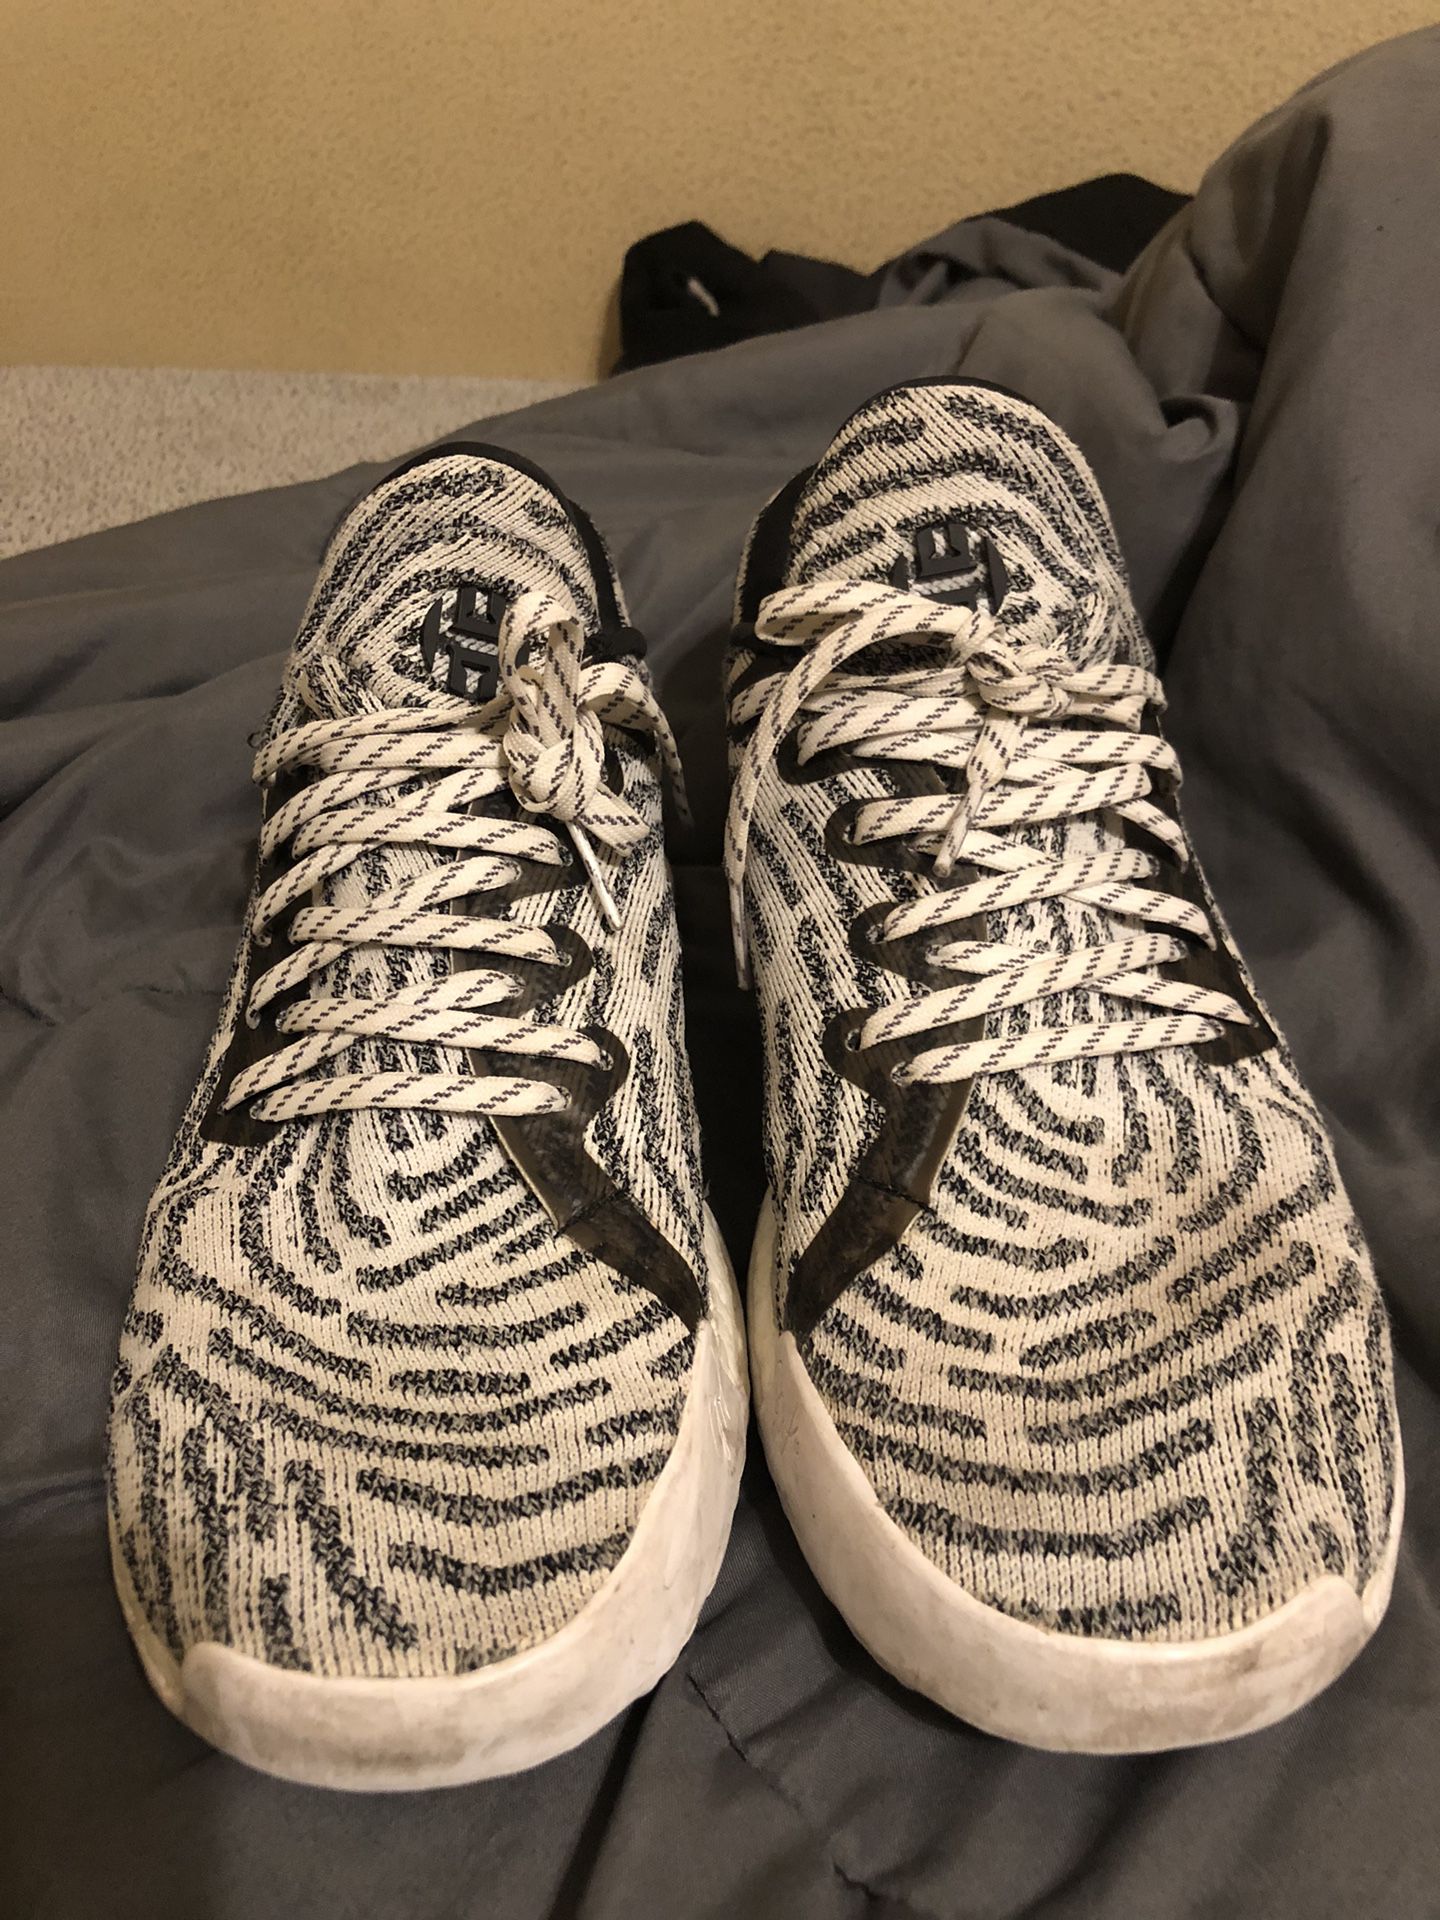 Adidas Harden Vol. 1 LS PK Month BHM White/Black Basketball for Sale in Pasadena, - OfferUp